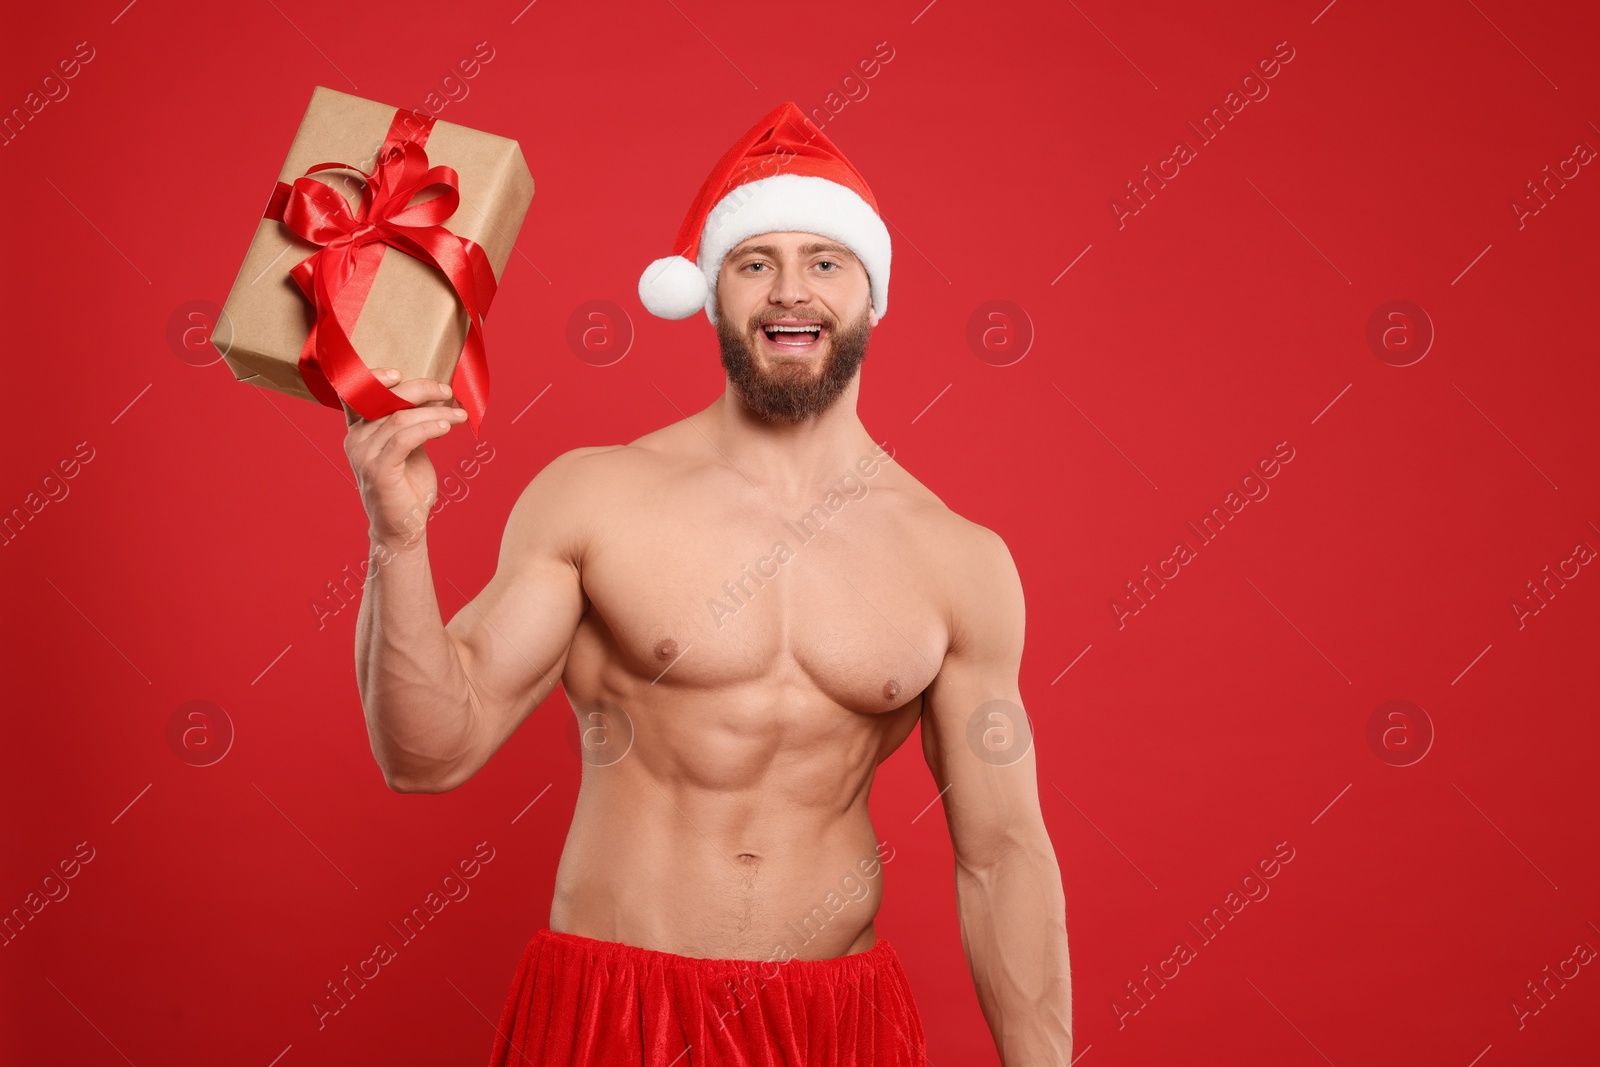 Photo of Attractive young man with muscular body in Santa hat holding Christmas gift box on red background